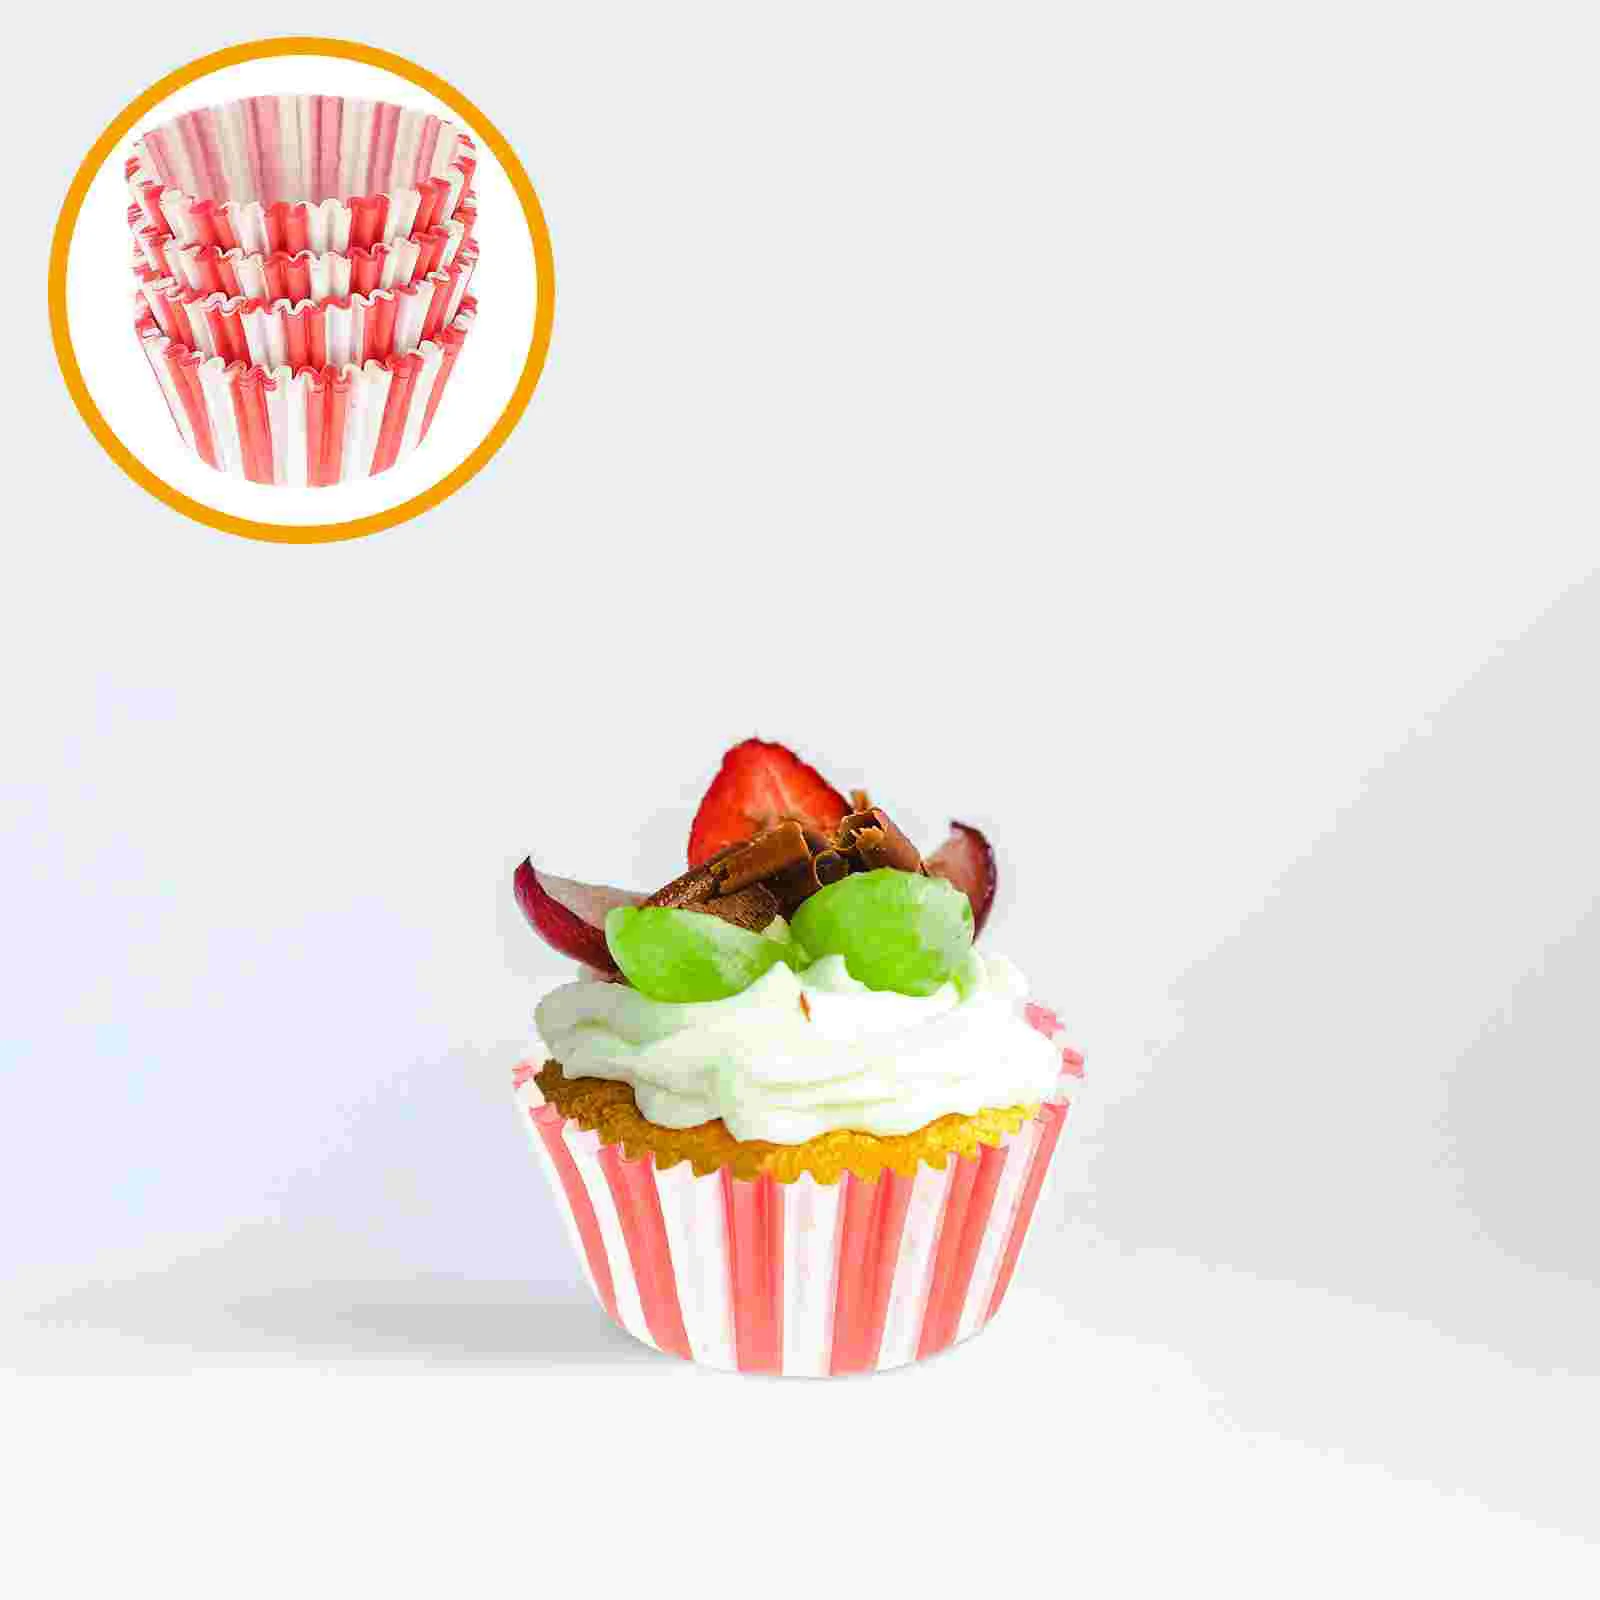 100 Pcs Stripe Home Useful White Cupcake Liners Cupcake Cups Muffin Cup Liner Cake Cup Liner Cupcake Liner Cups for Cake  Baking